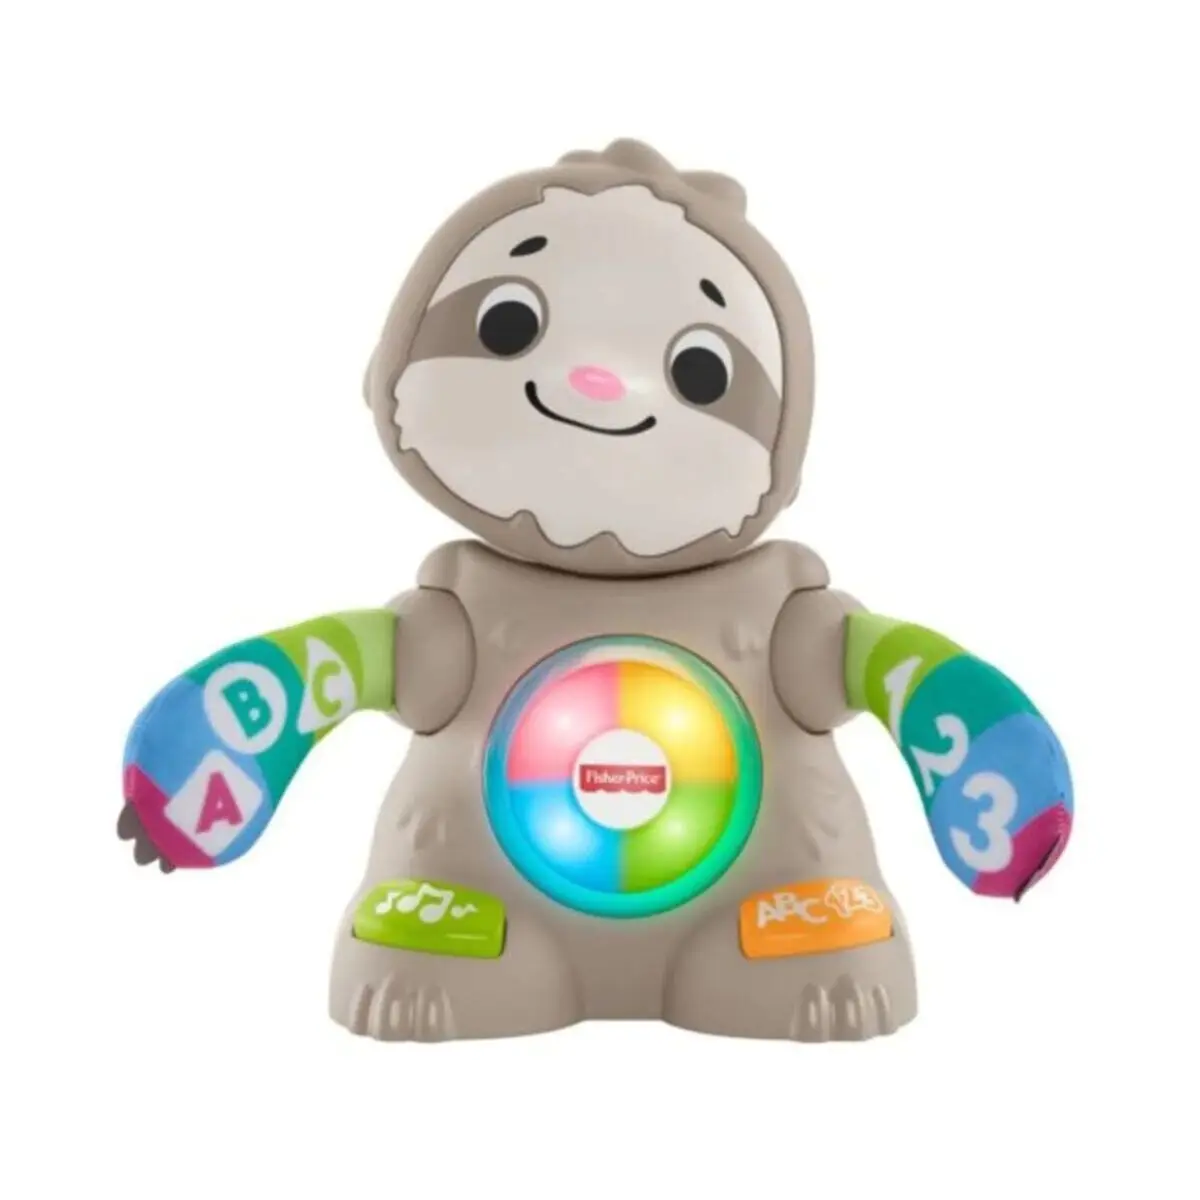 

Fisher Price Linkimals Smooth Moves Sloth Interactive Educational Toy with Music Lights, & Motion For Baby Ages 9 Months & Up